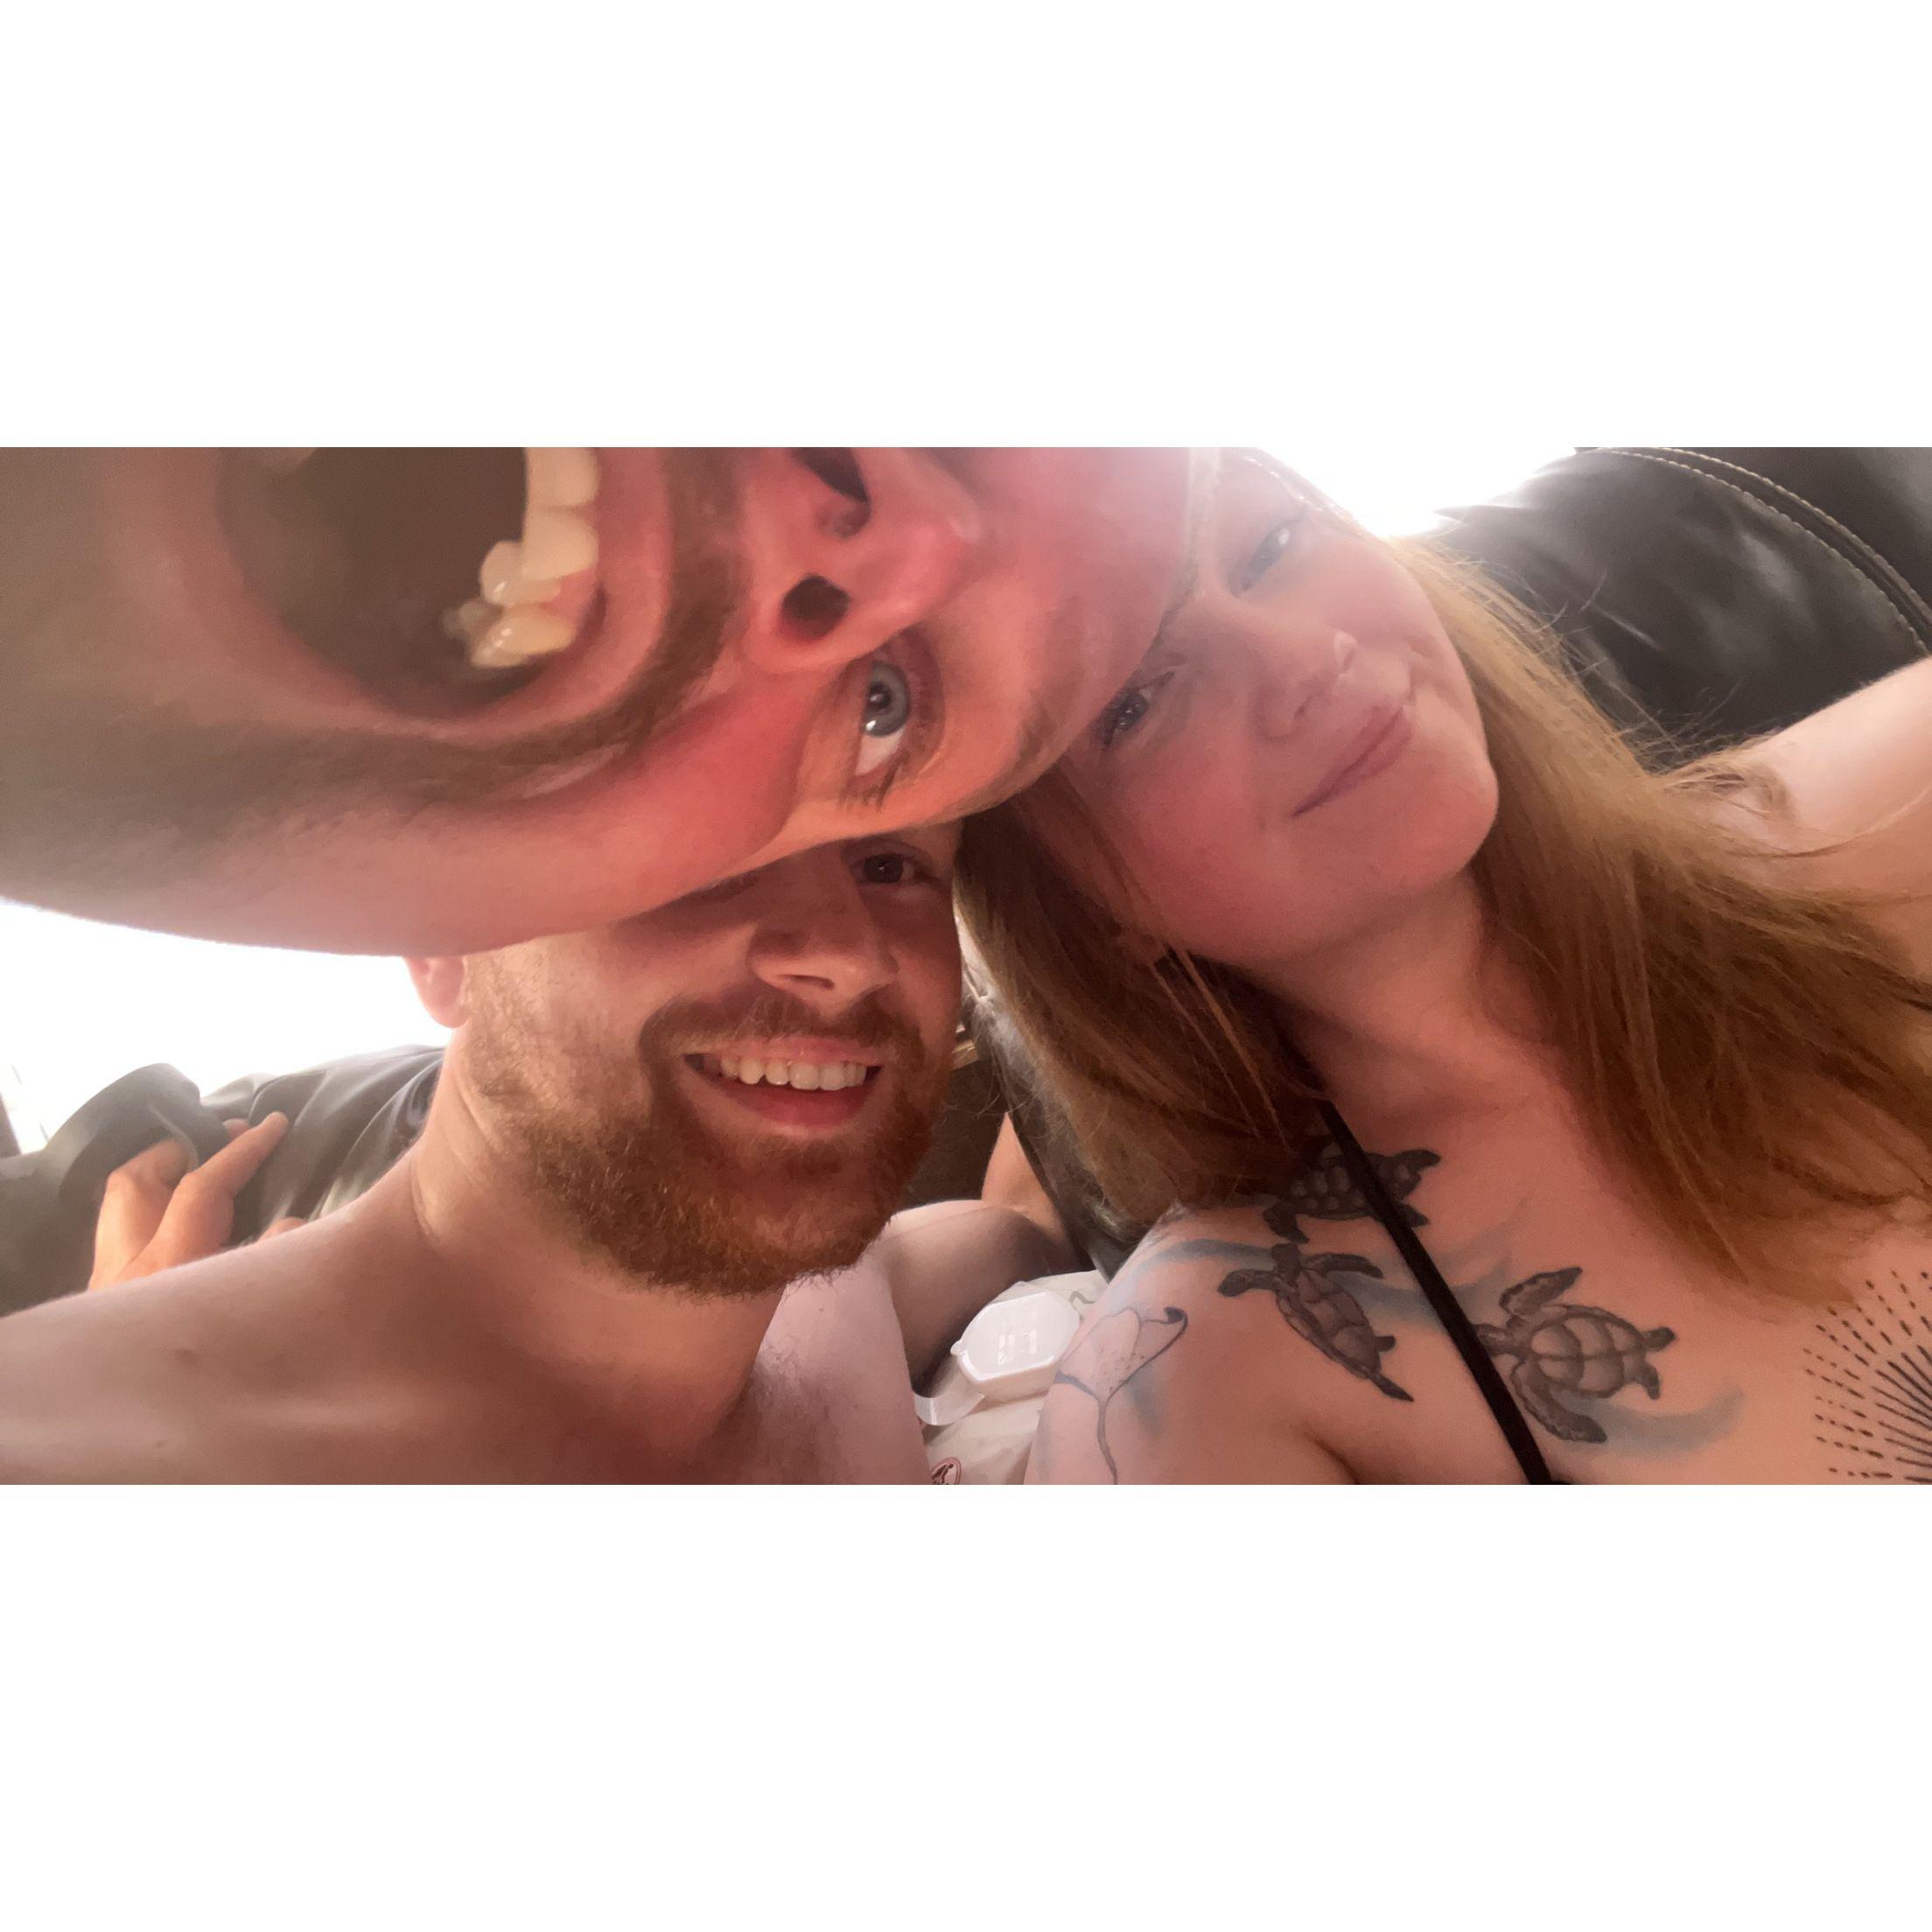 Our first music festival together.